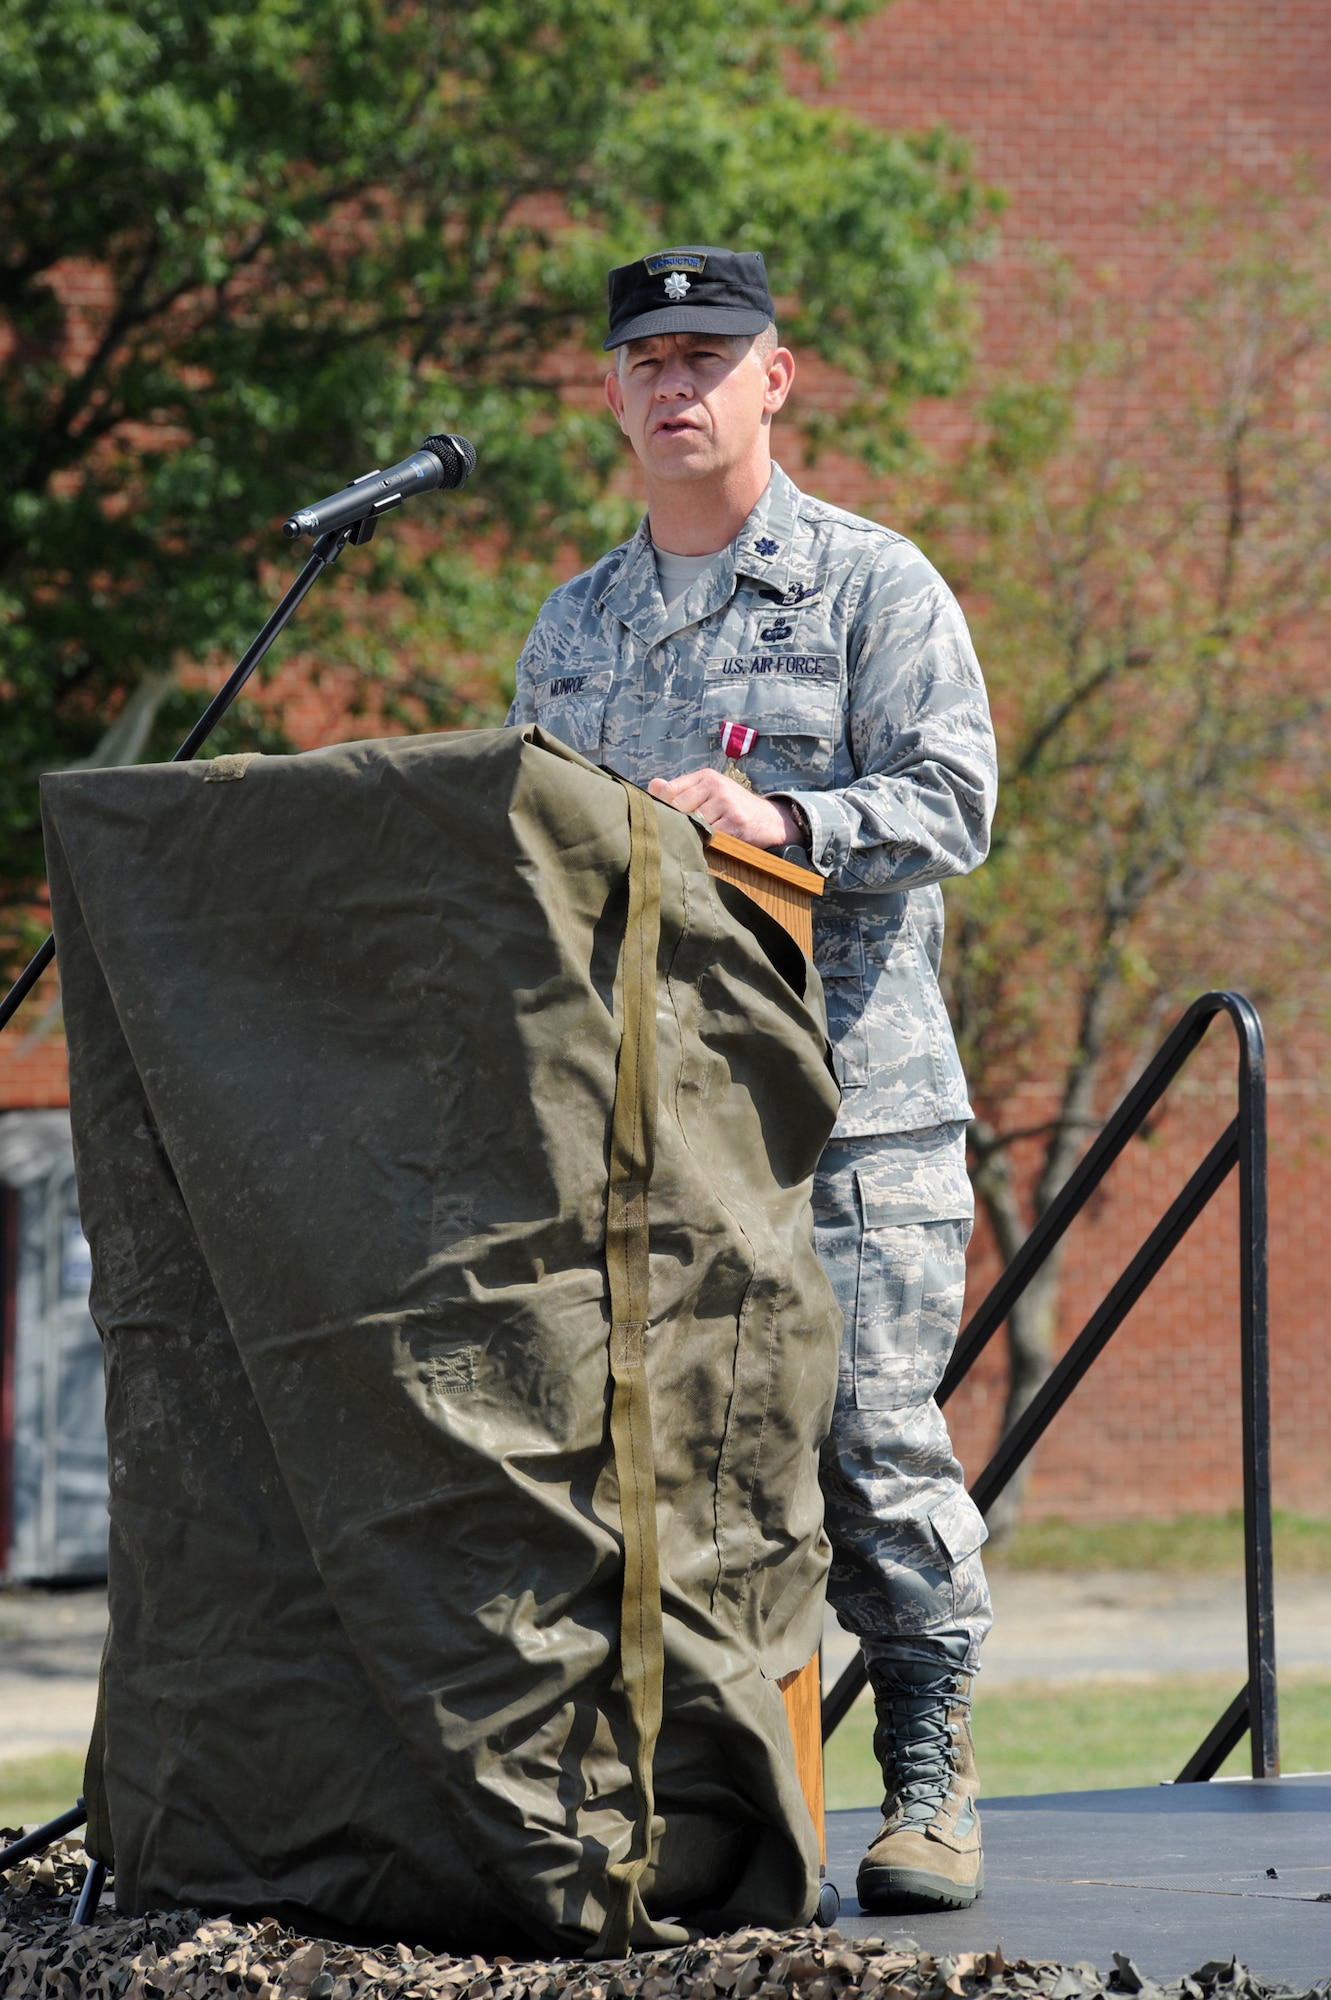 Lt. Col. Mitchell Monroe, 421st Combat Training Squadron commander, gives a final speech July 13 during his change of command ceremony at Joint Base McGuire-Dix-Lakehurst, N.J.  Lt. Col. David Lenderman will assume command of the 421st CTS housed at the U.S. Air Force Expeditionary Center on Fort Dix. (U.S. Air Force Photo/Staff Sgt. Nathan G. Bevier) 